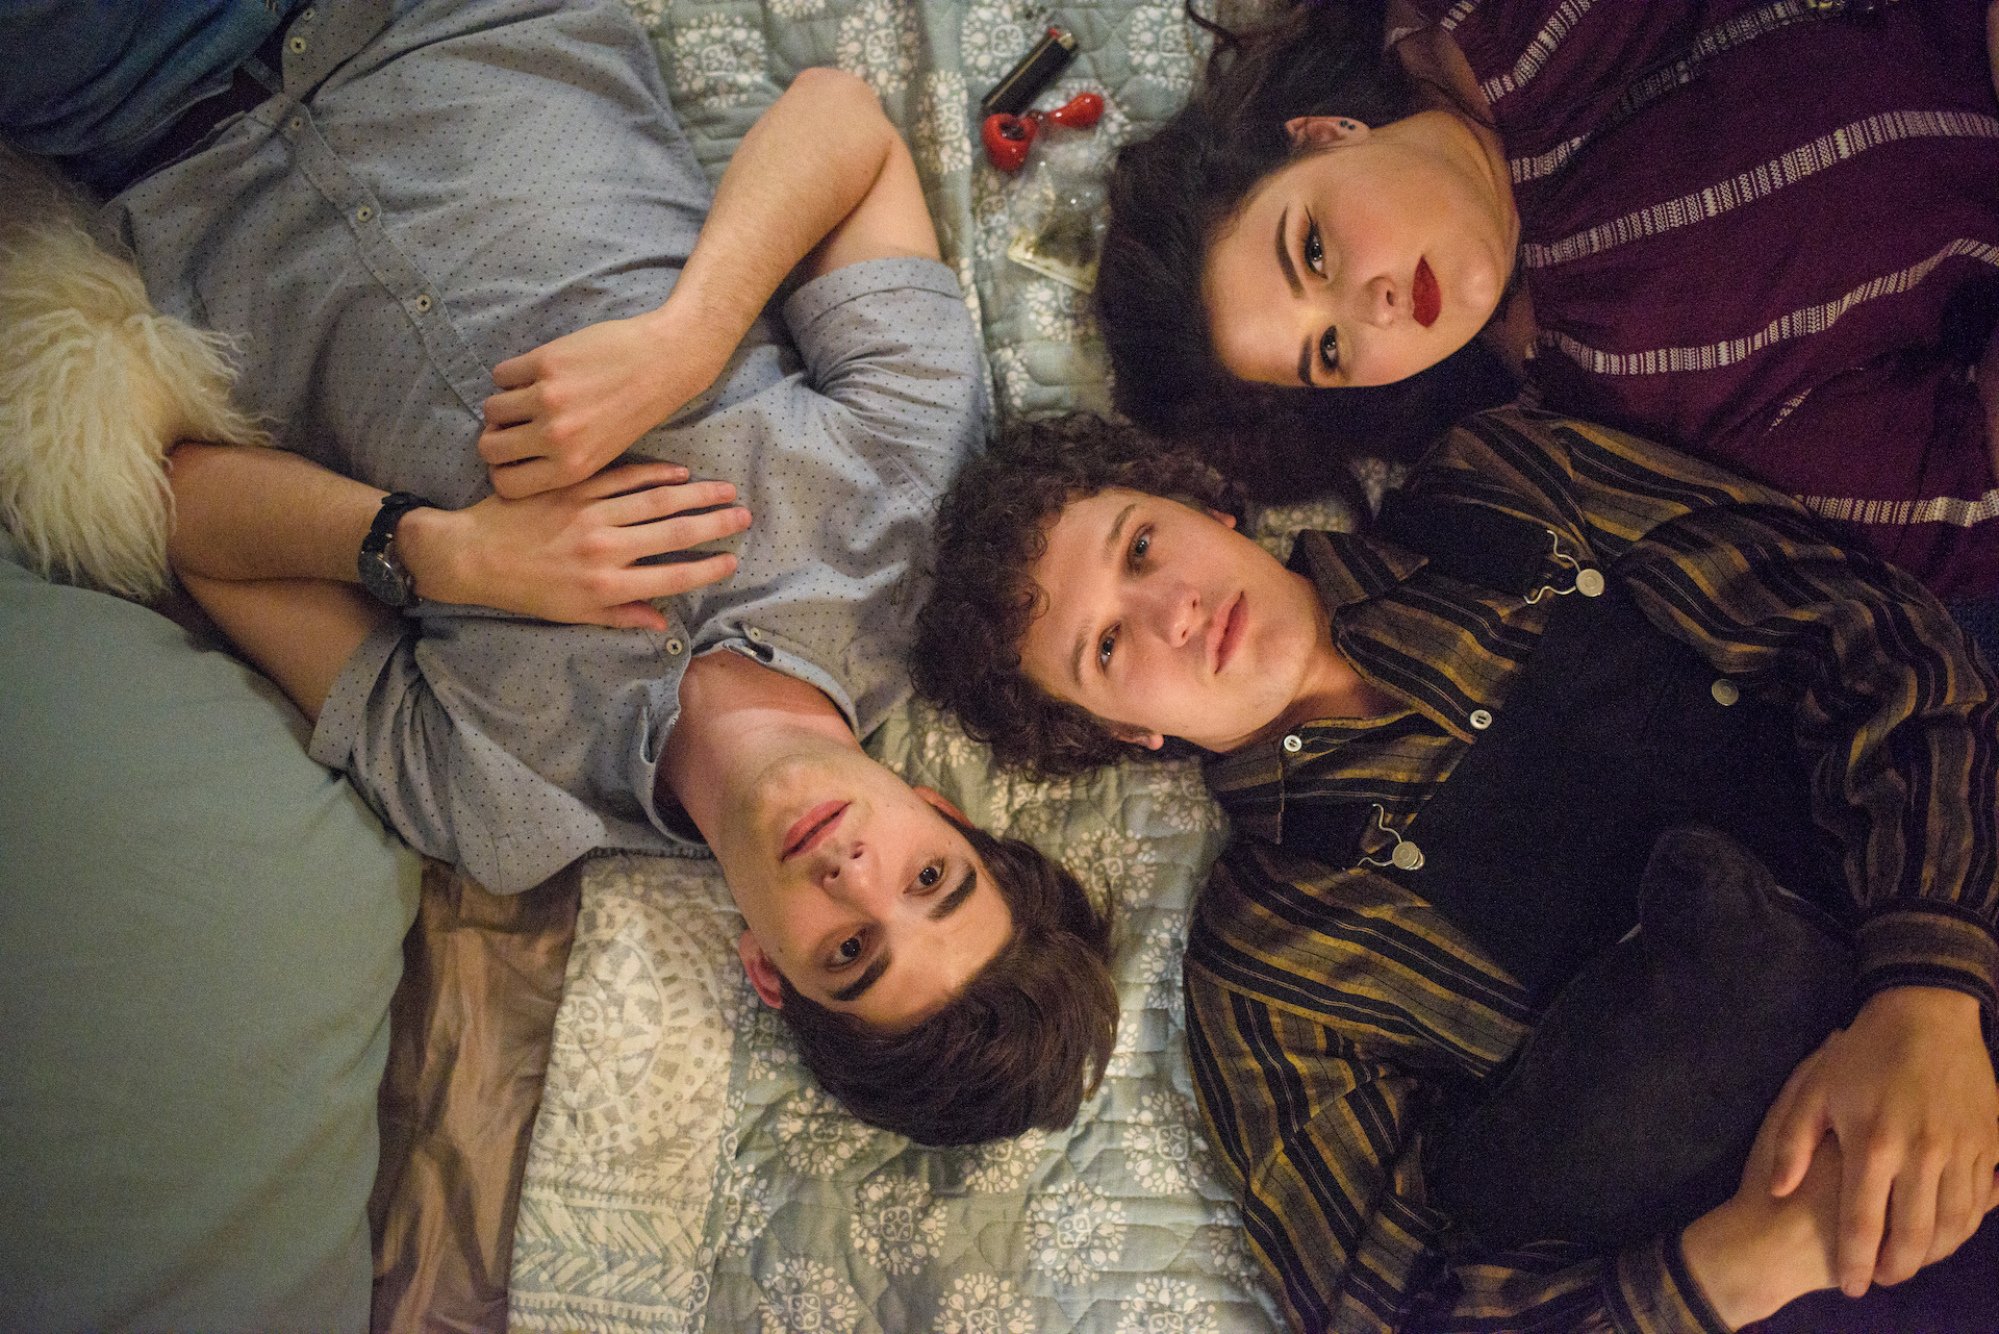 A scene from "Alex Strangelove": teens hanging out on a bed